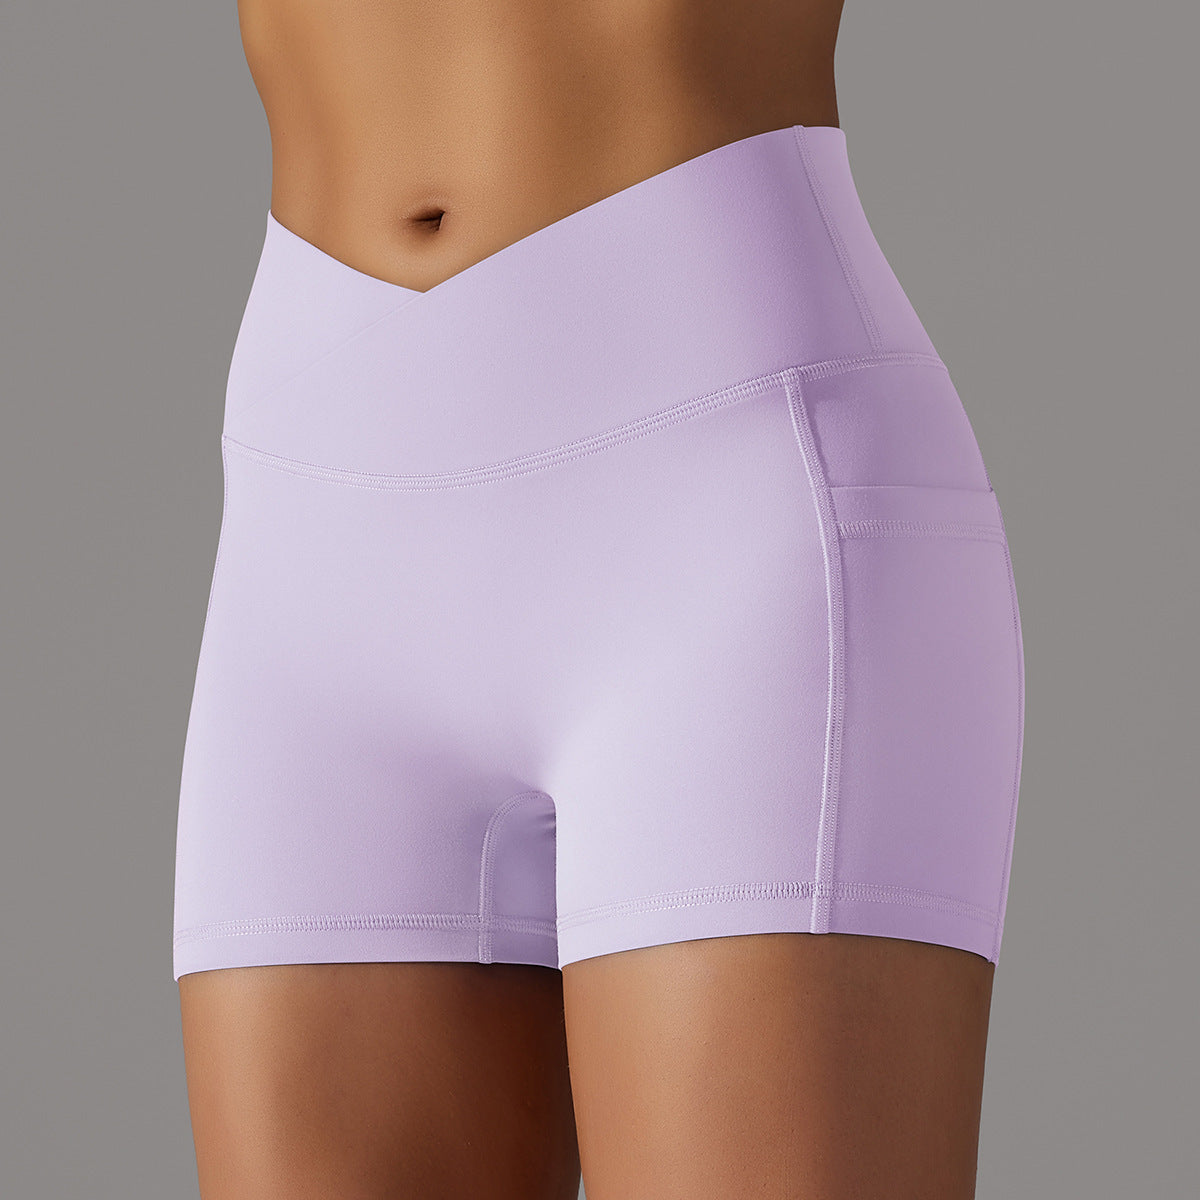 Yoga Shorts with Pockets With A Unique stylish design